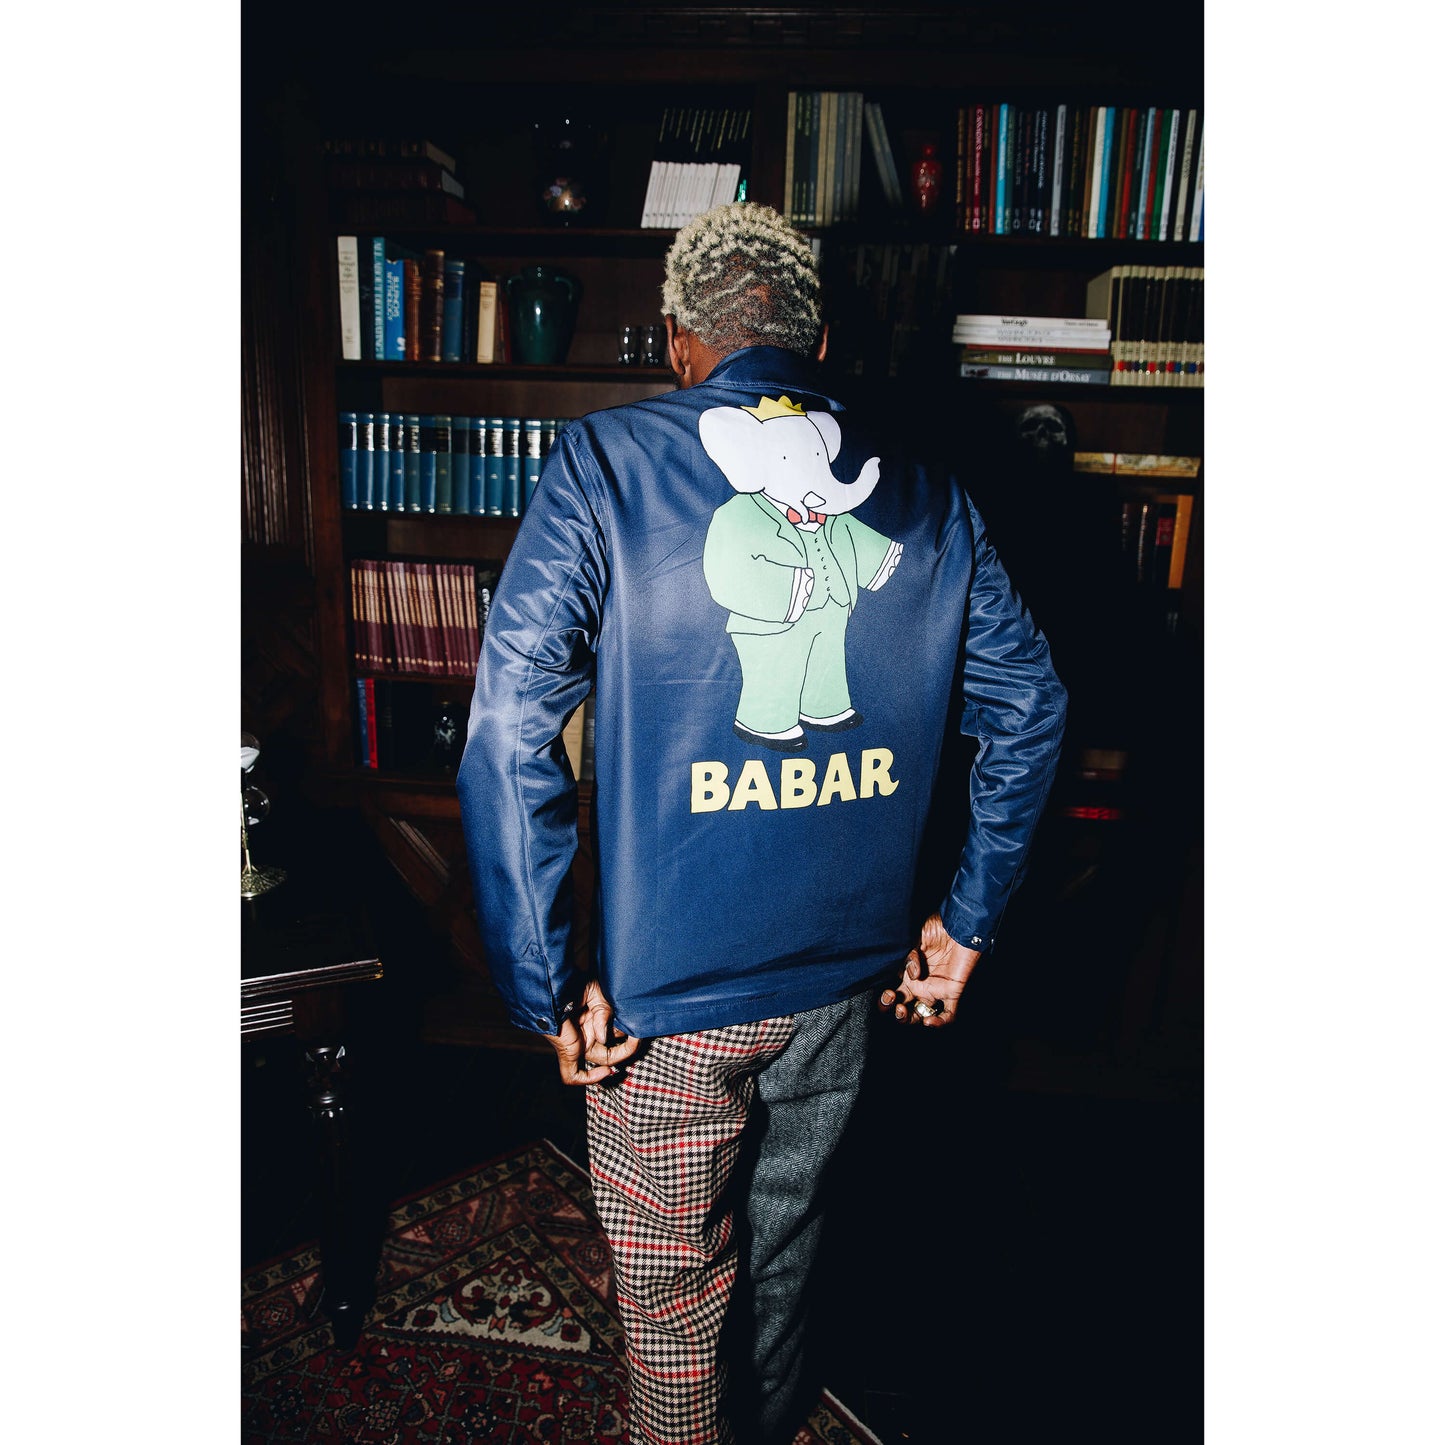 A$AP Nast wearing the navy Babar Coach's Jacket.